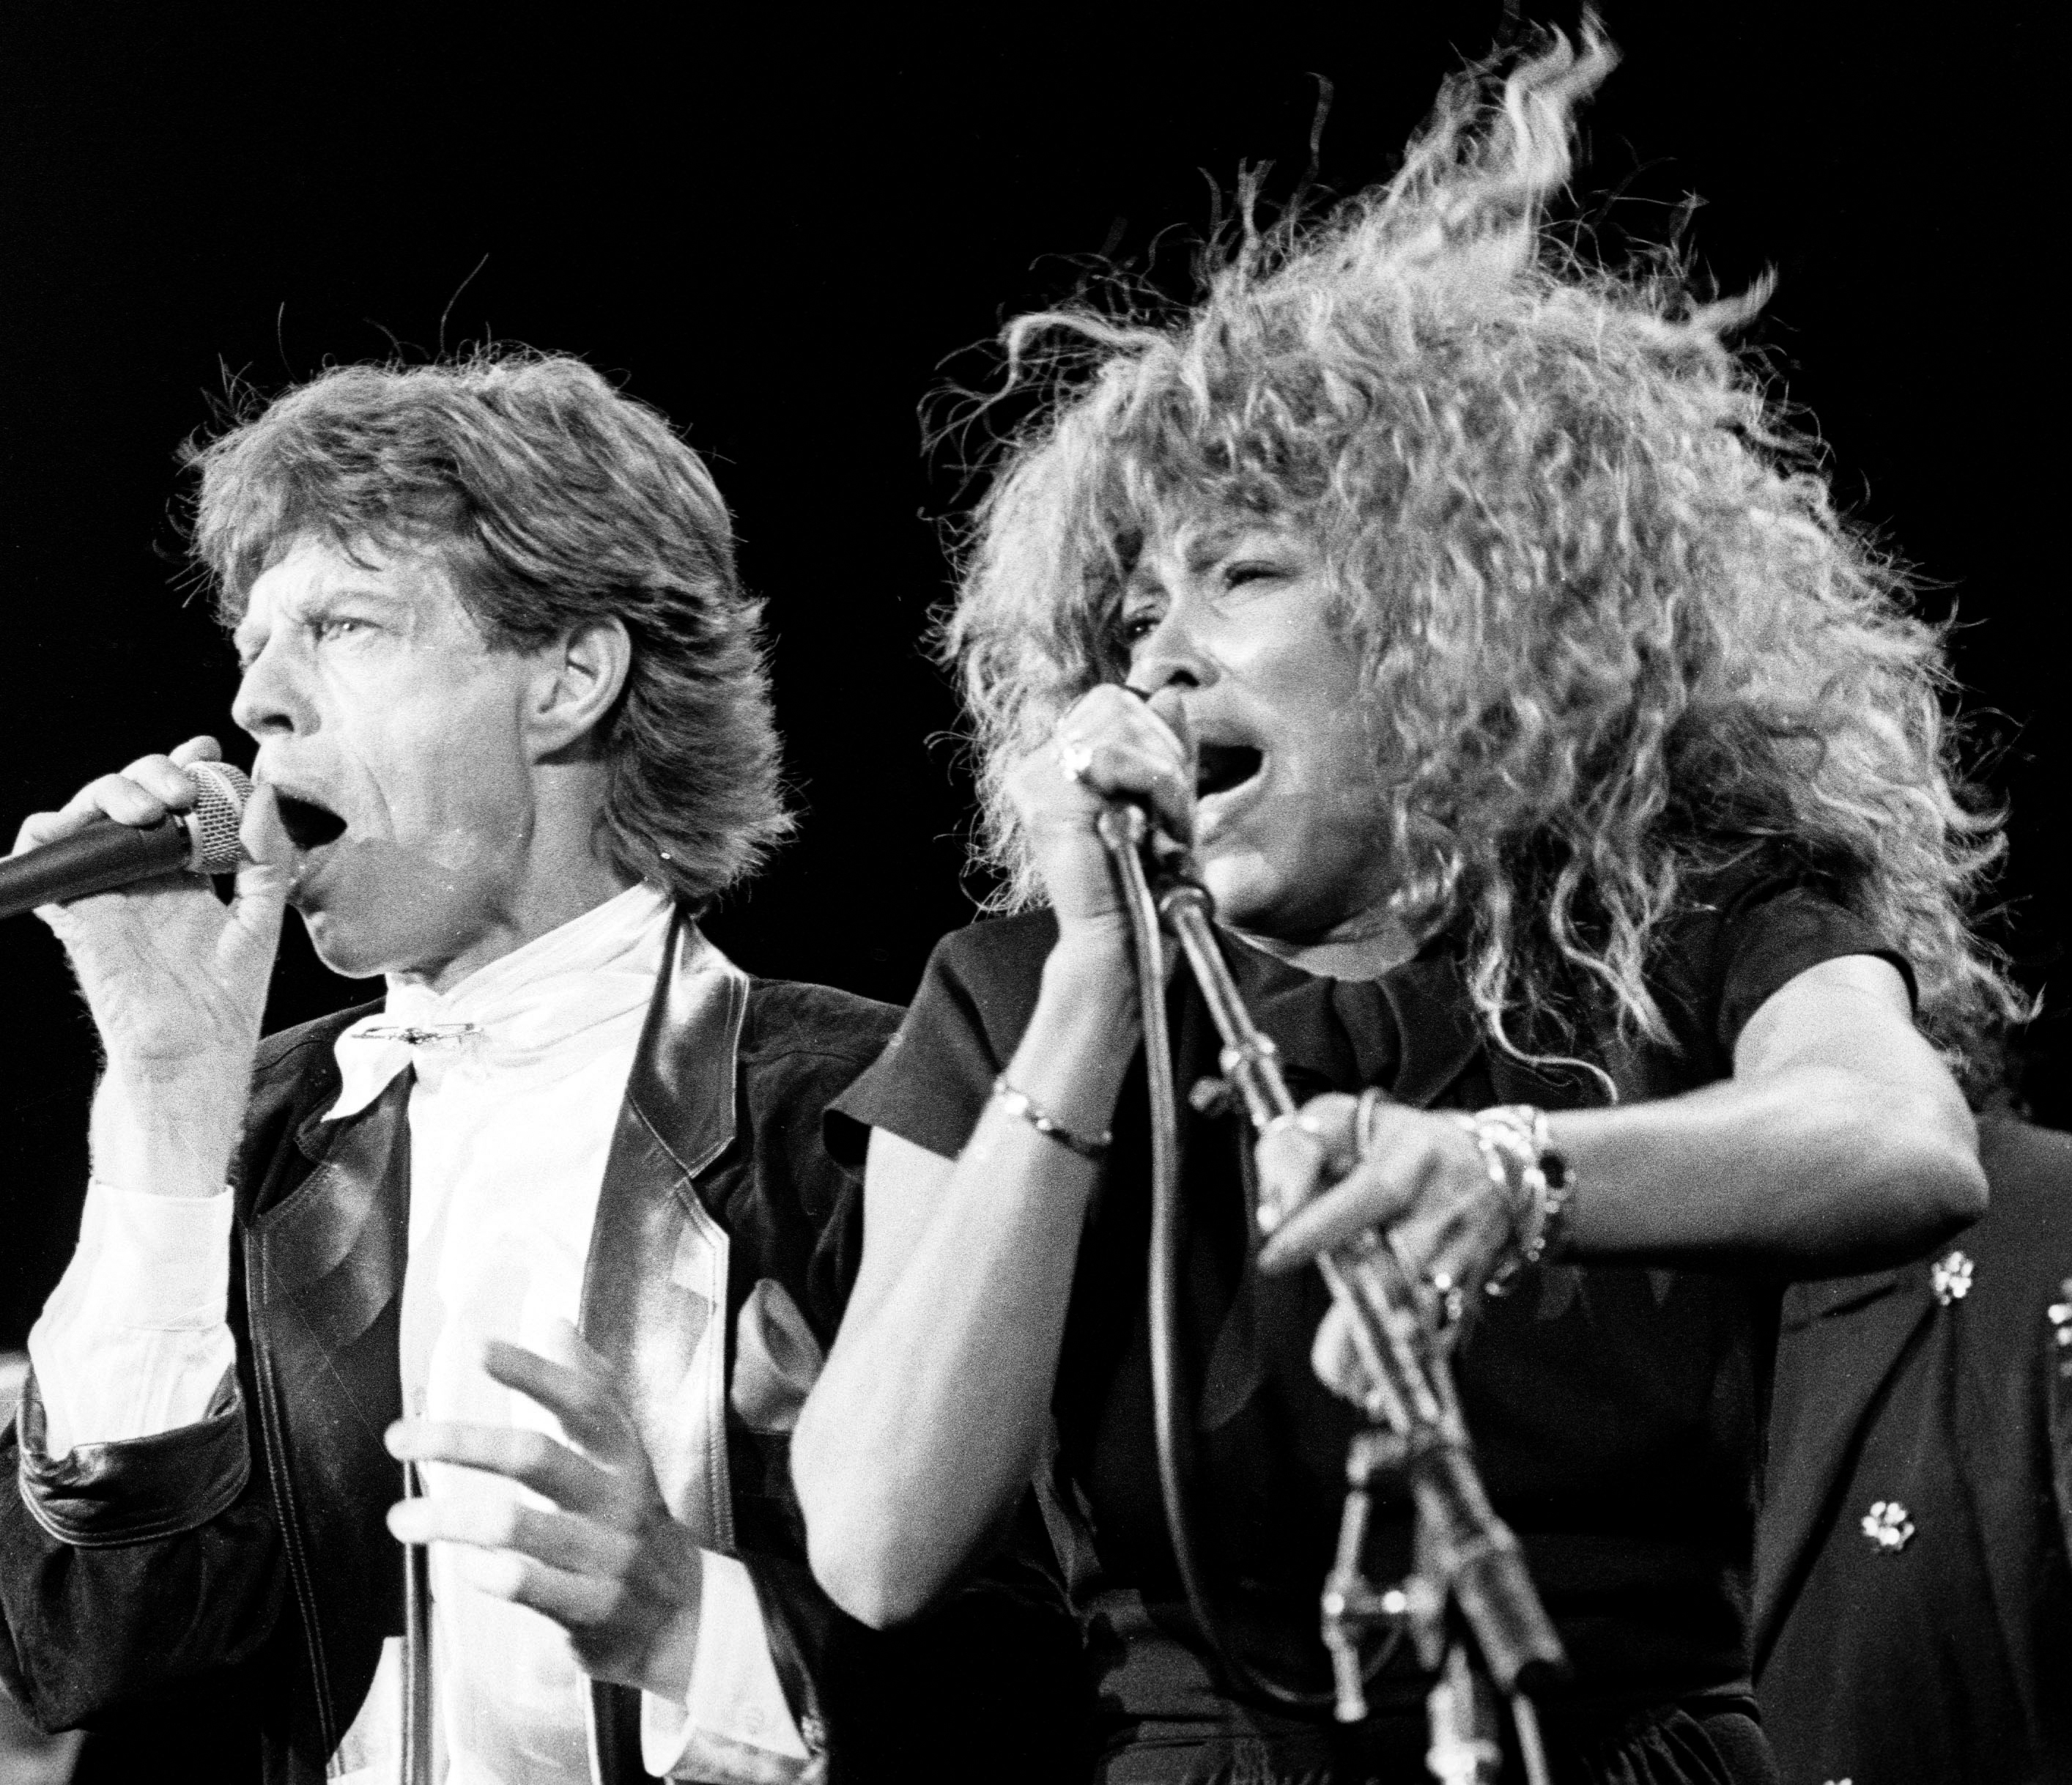 Mick Jagger and Tina Turner during the Rock and Roll Hall of Fame in New York